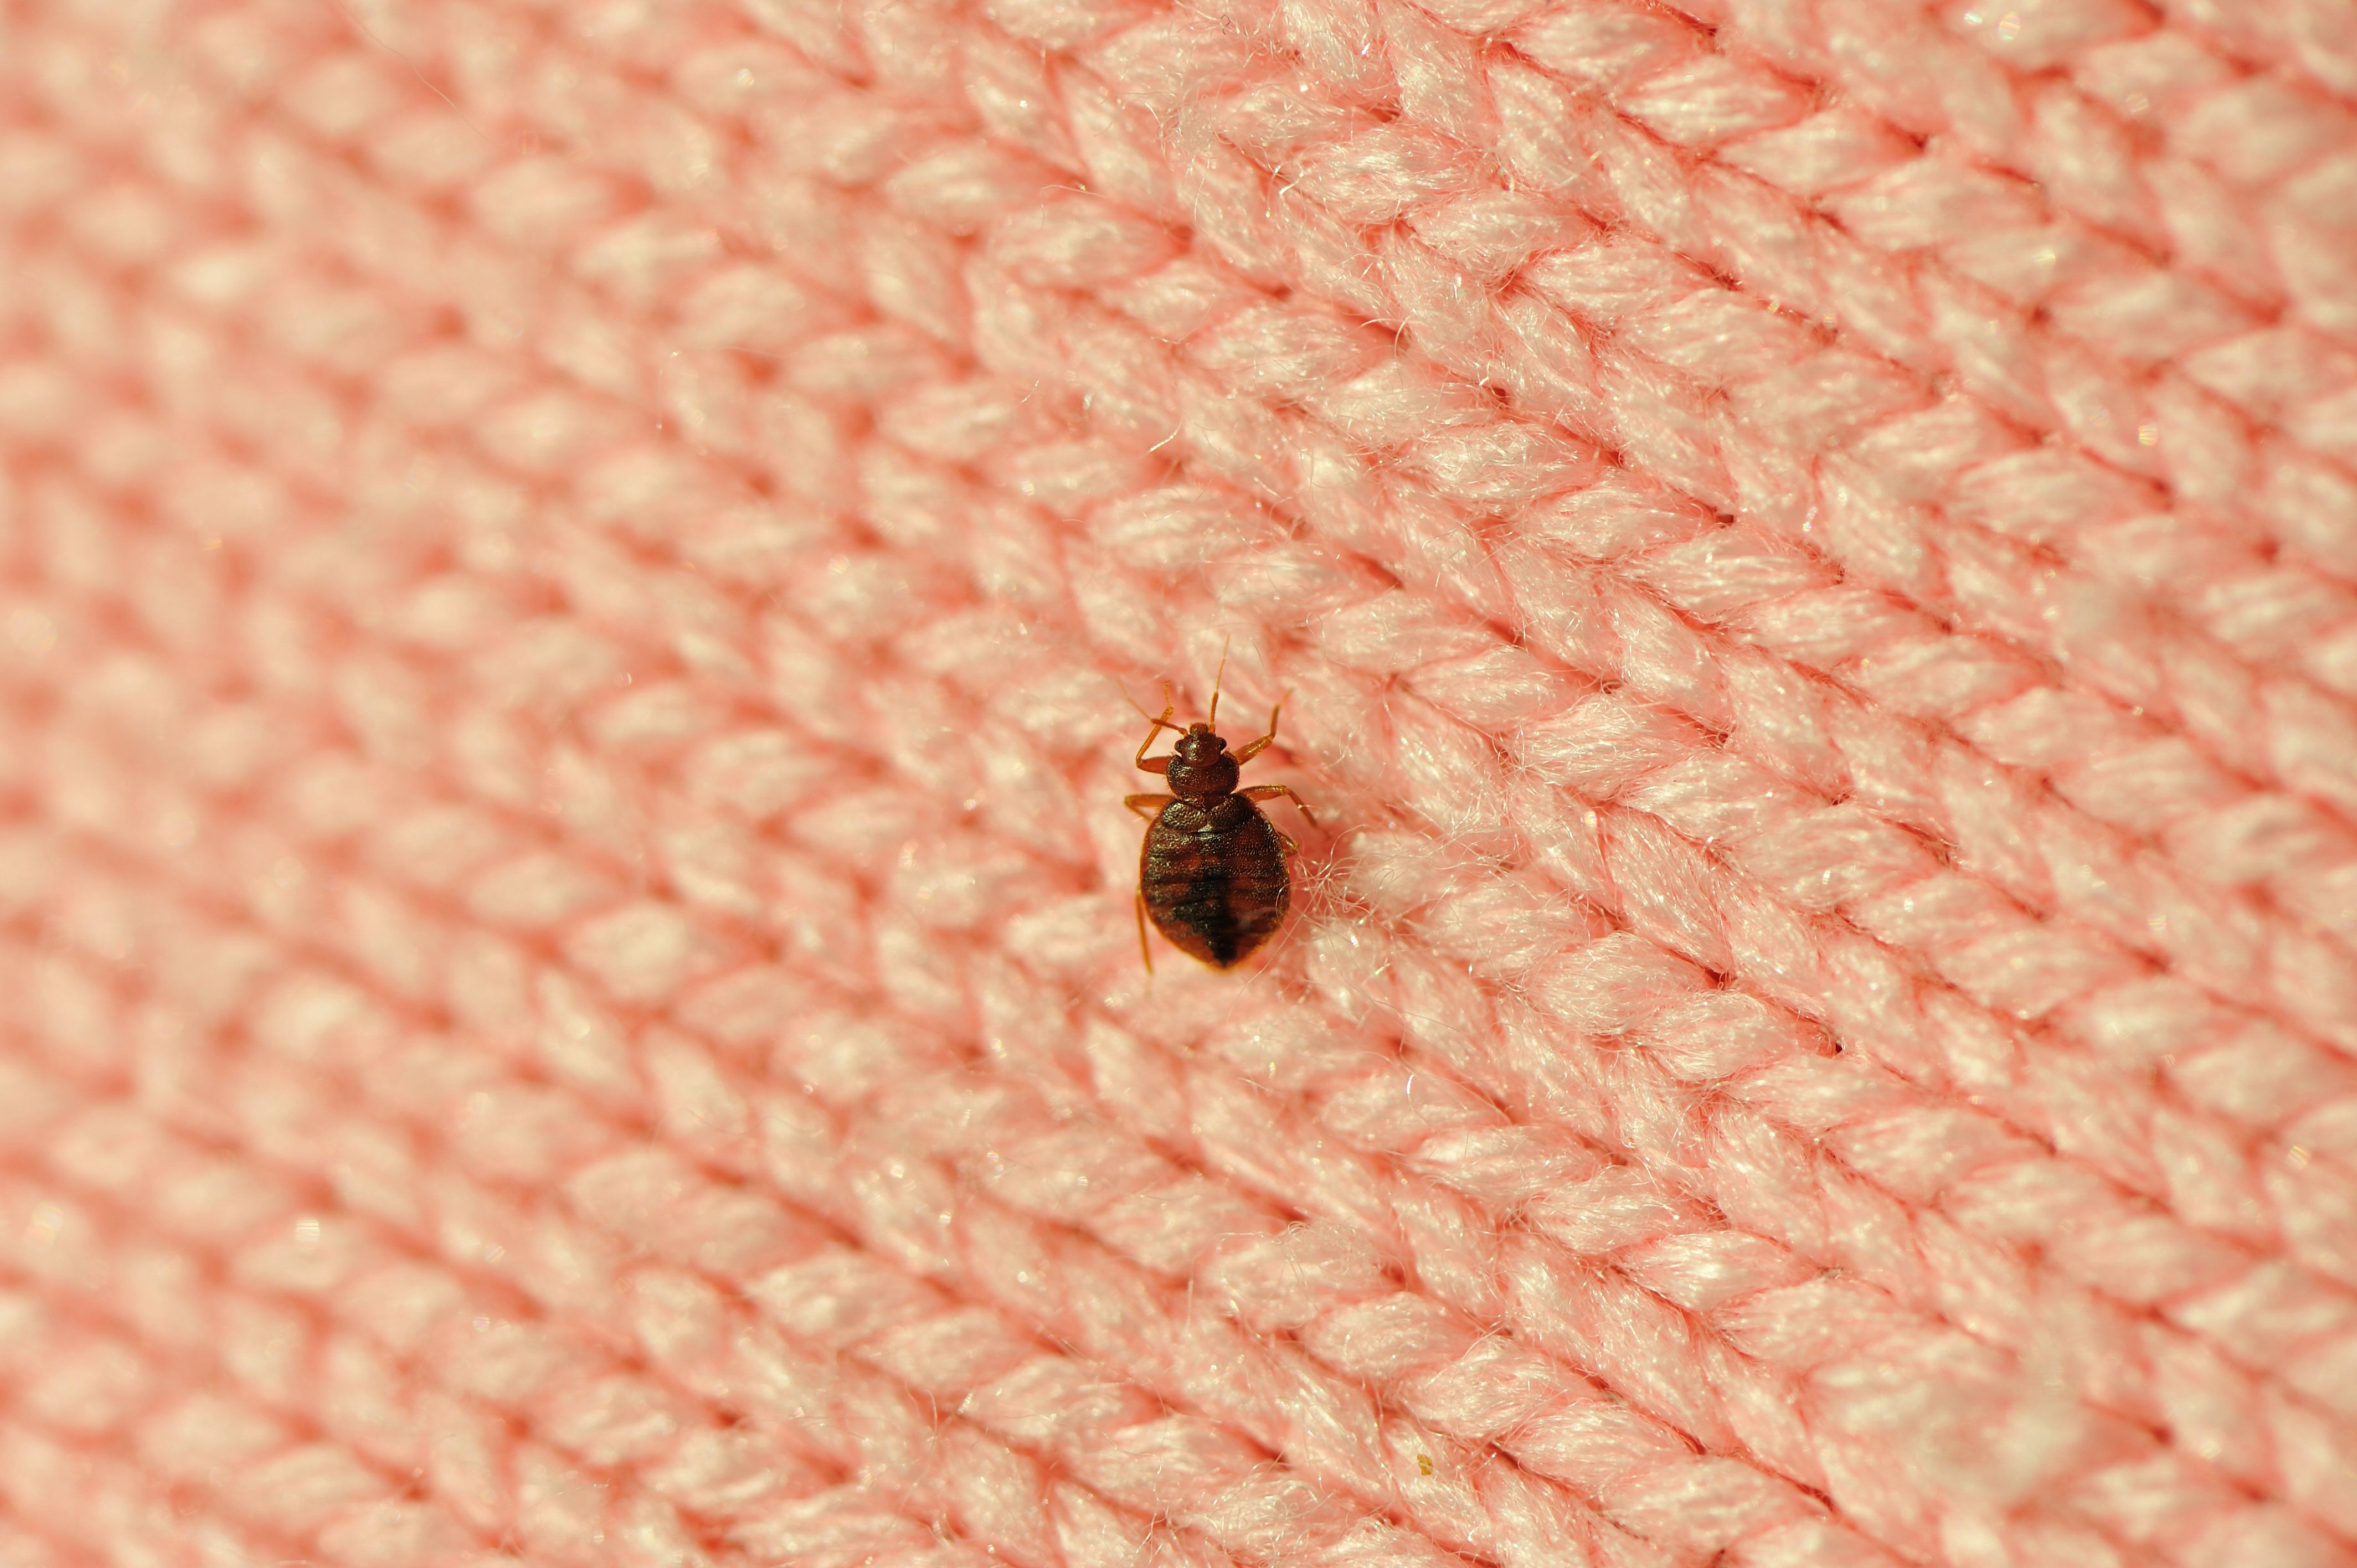 Where bed bugs hide in the home — Hayden’s student essay